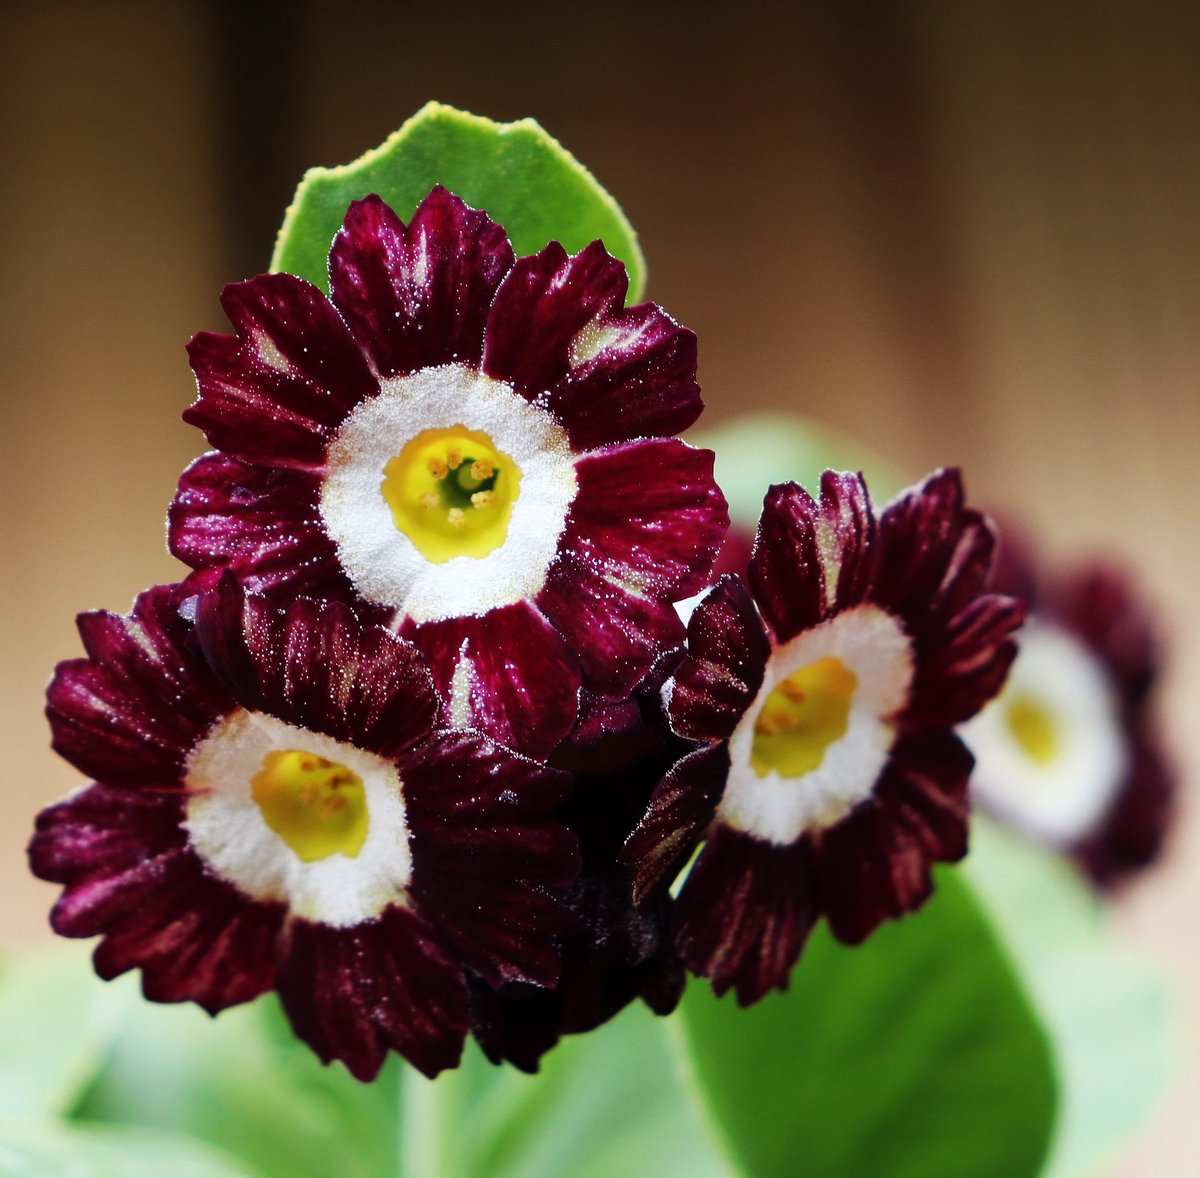 As it’s still the only one of my Auricula’s that’s started to bloom here’s another picture of ‘Tay Tiger’ that I took this afternoon 🤍 #gardening #gardenlife #gardener #gardenphotography #gardenchat #plants #mygardentoday #auricula #auriculas #auriculataytiger #primulaauricula